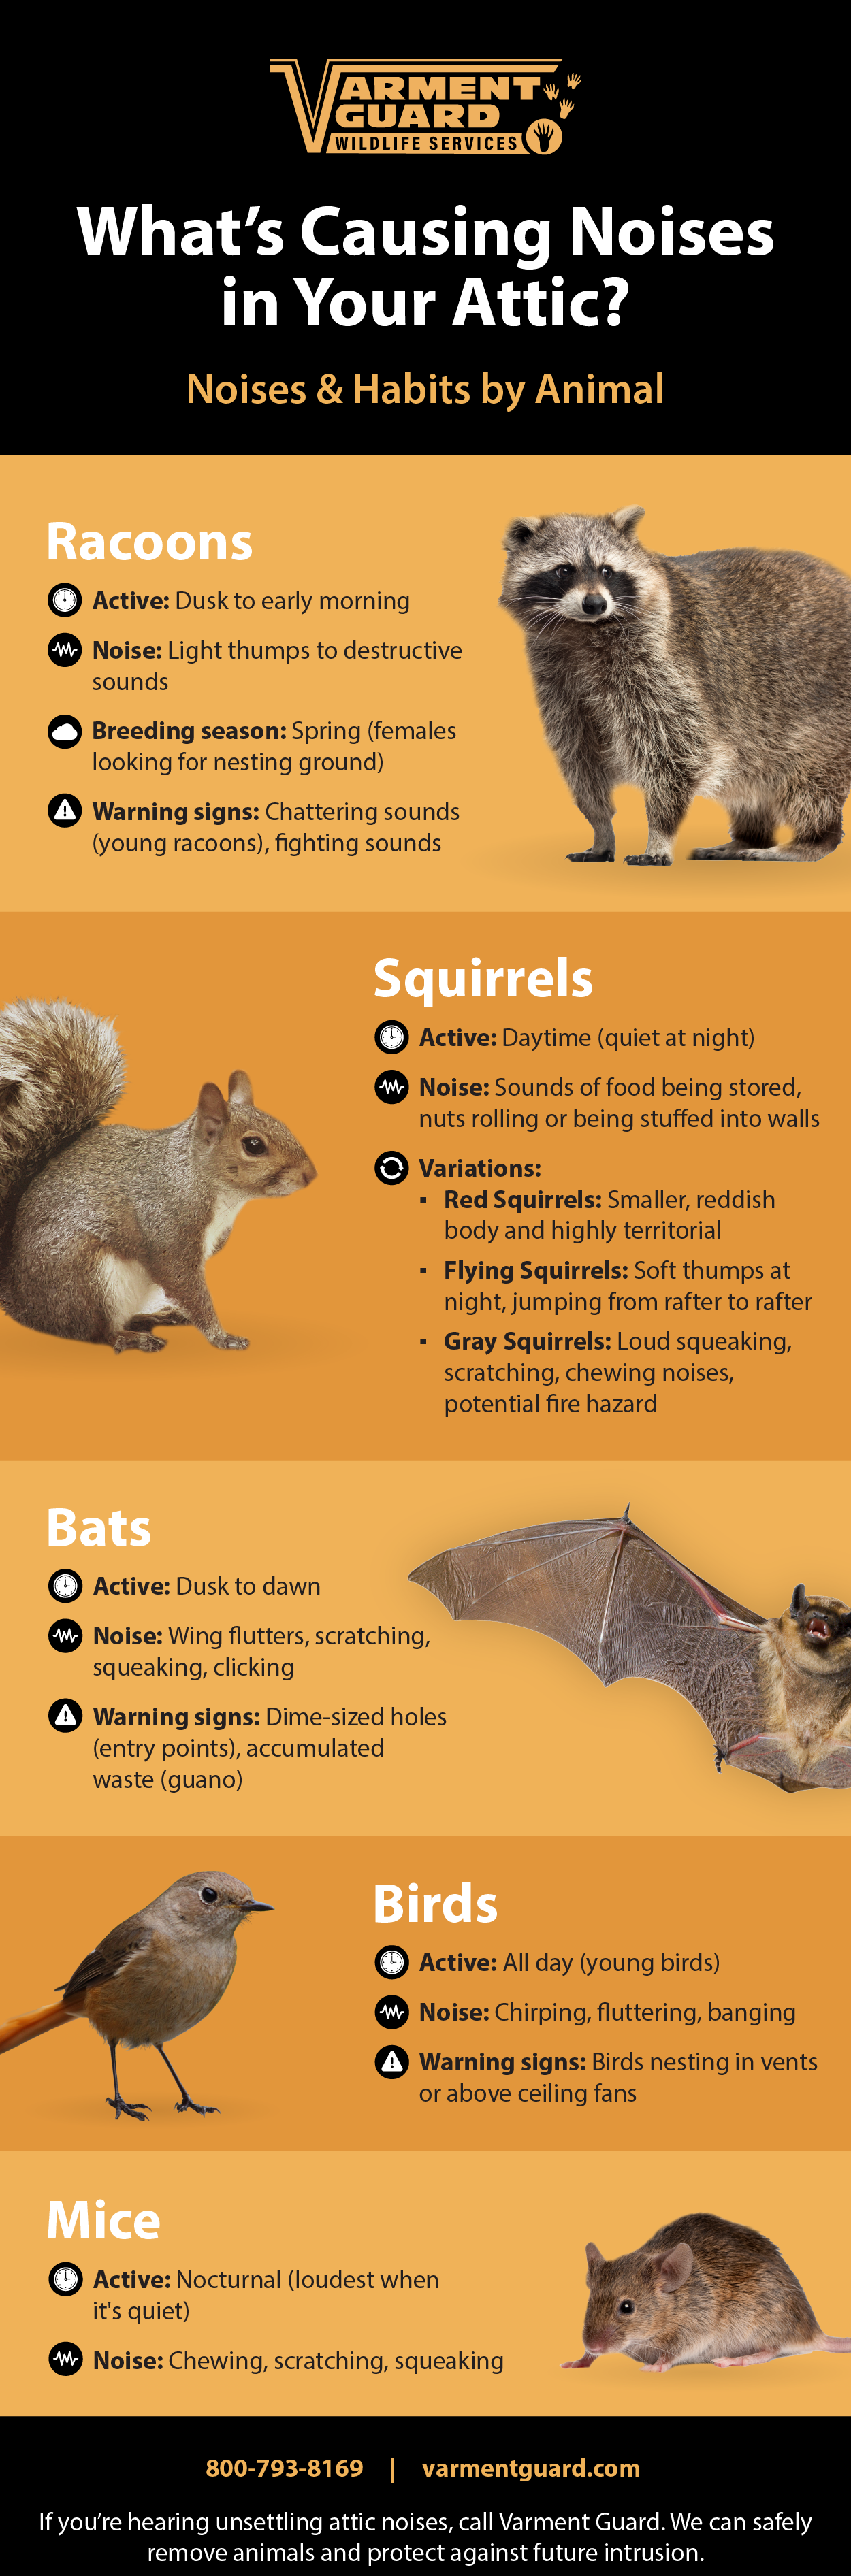 Hearing Noises? Identify Animals in Your Attic - Varment Guard Wildlife  Services